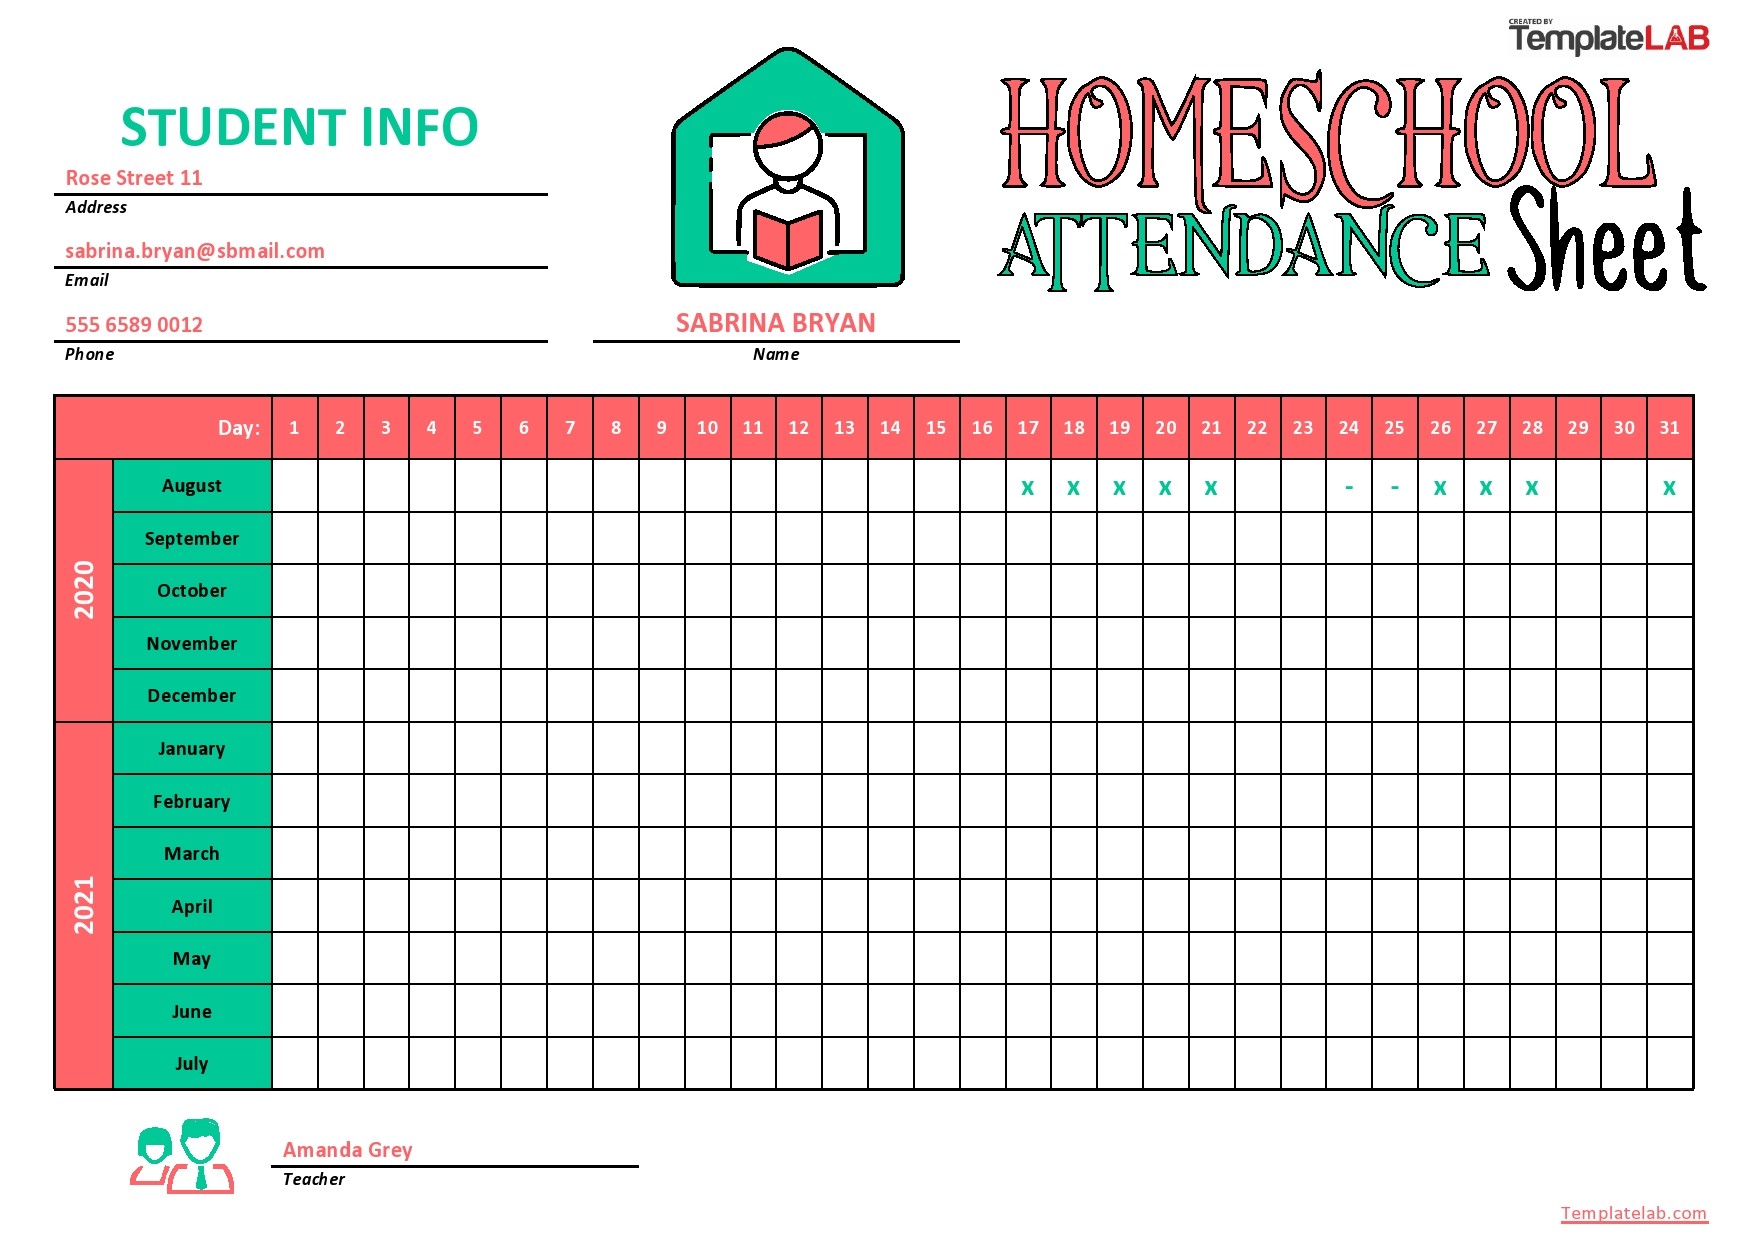 Annual Attendance Record Template from templatelab.com